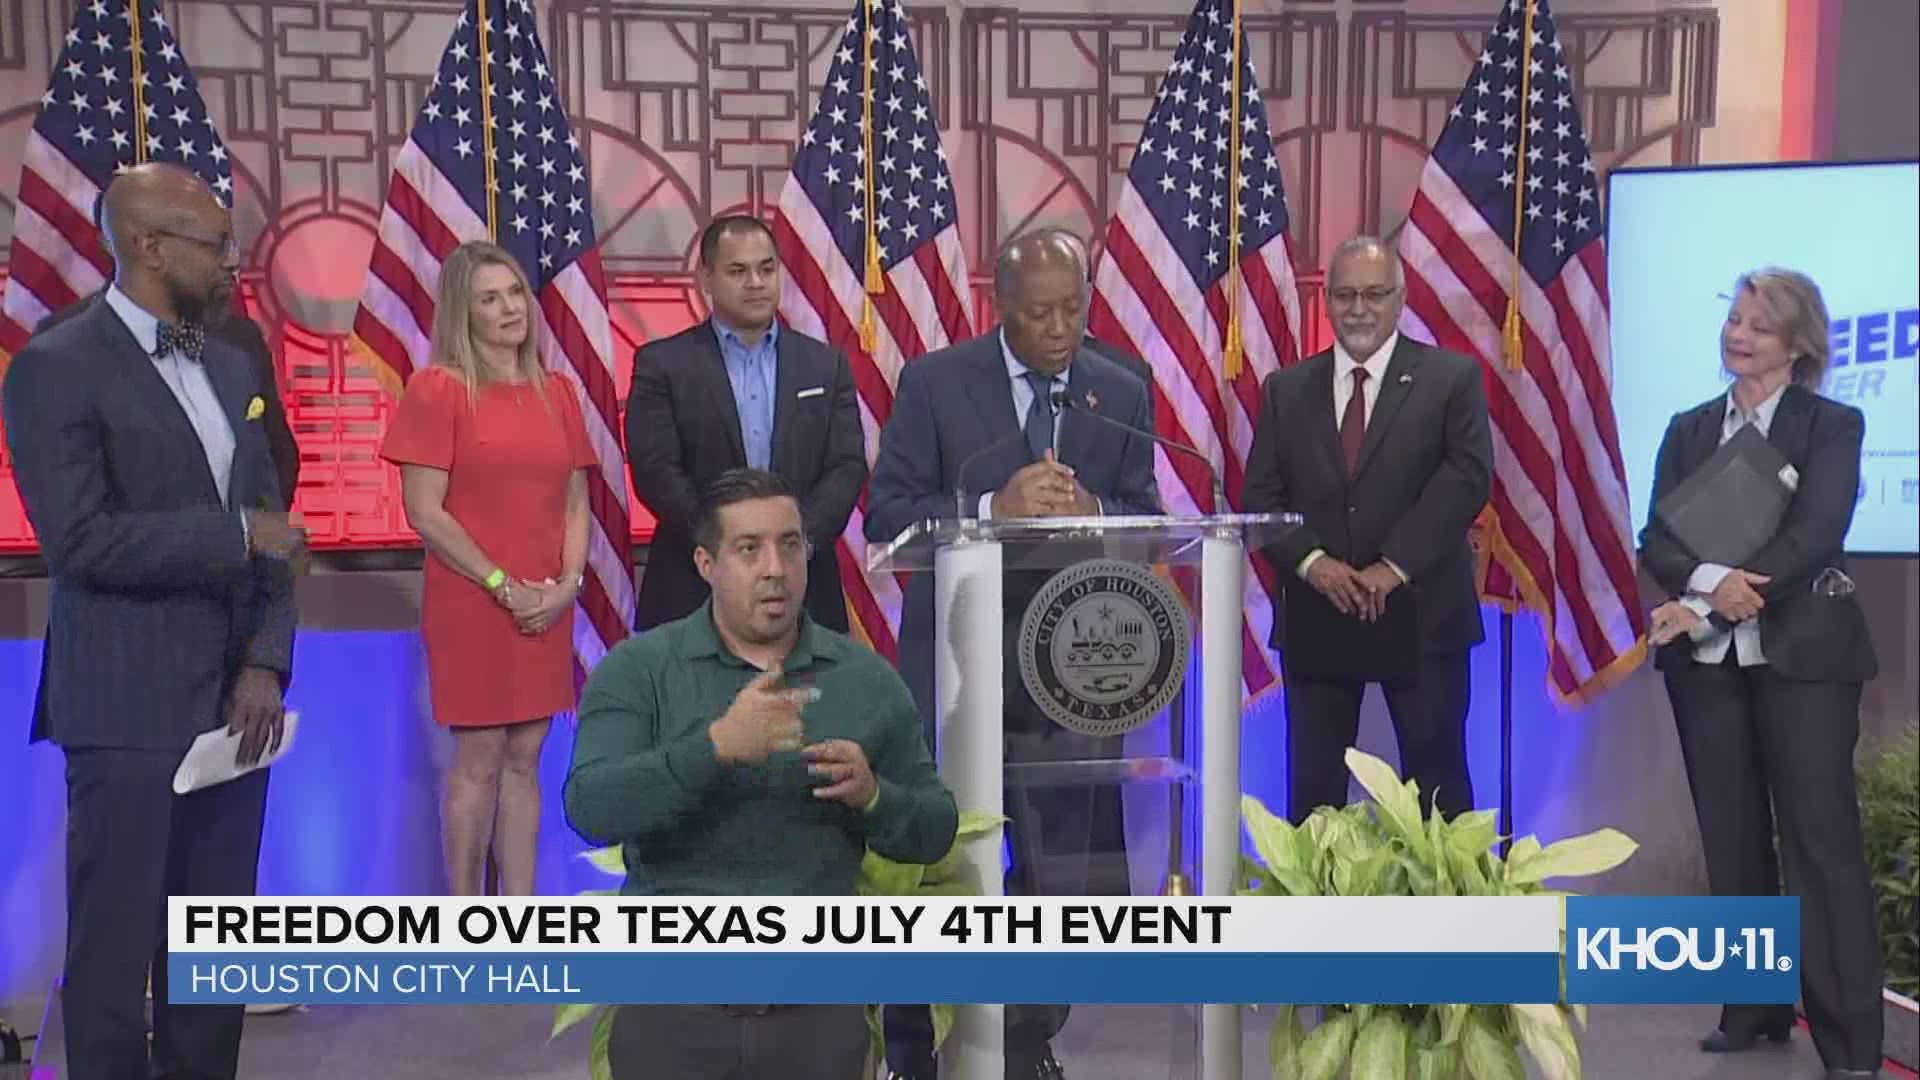 Houston will have to wait another year for the full return of Freedom Over Texas, the city's annual Fourth of July celebration.